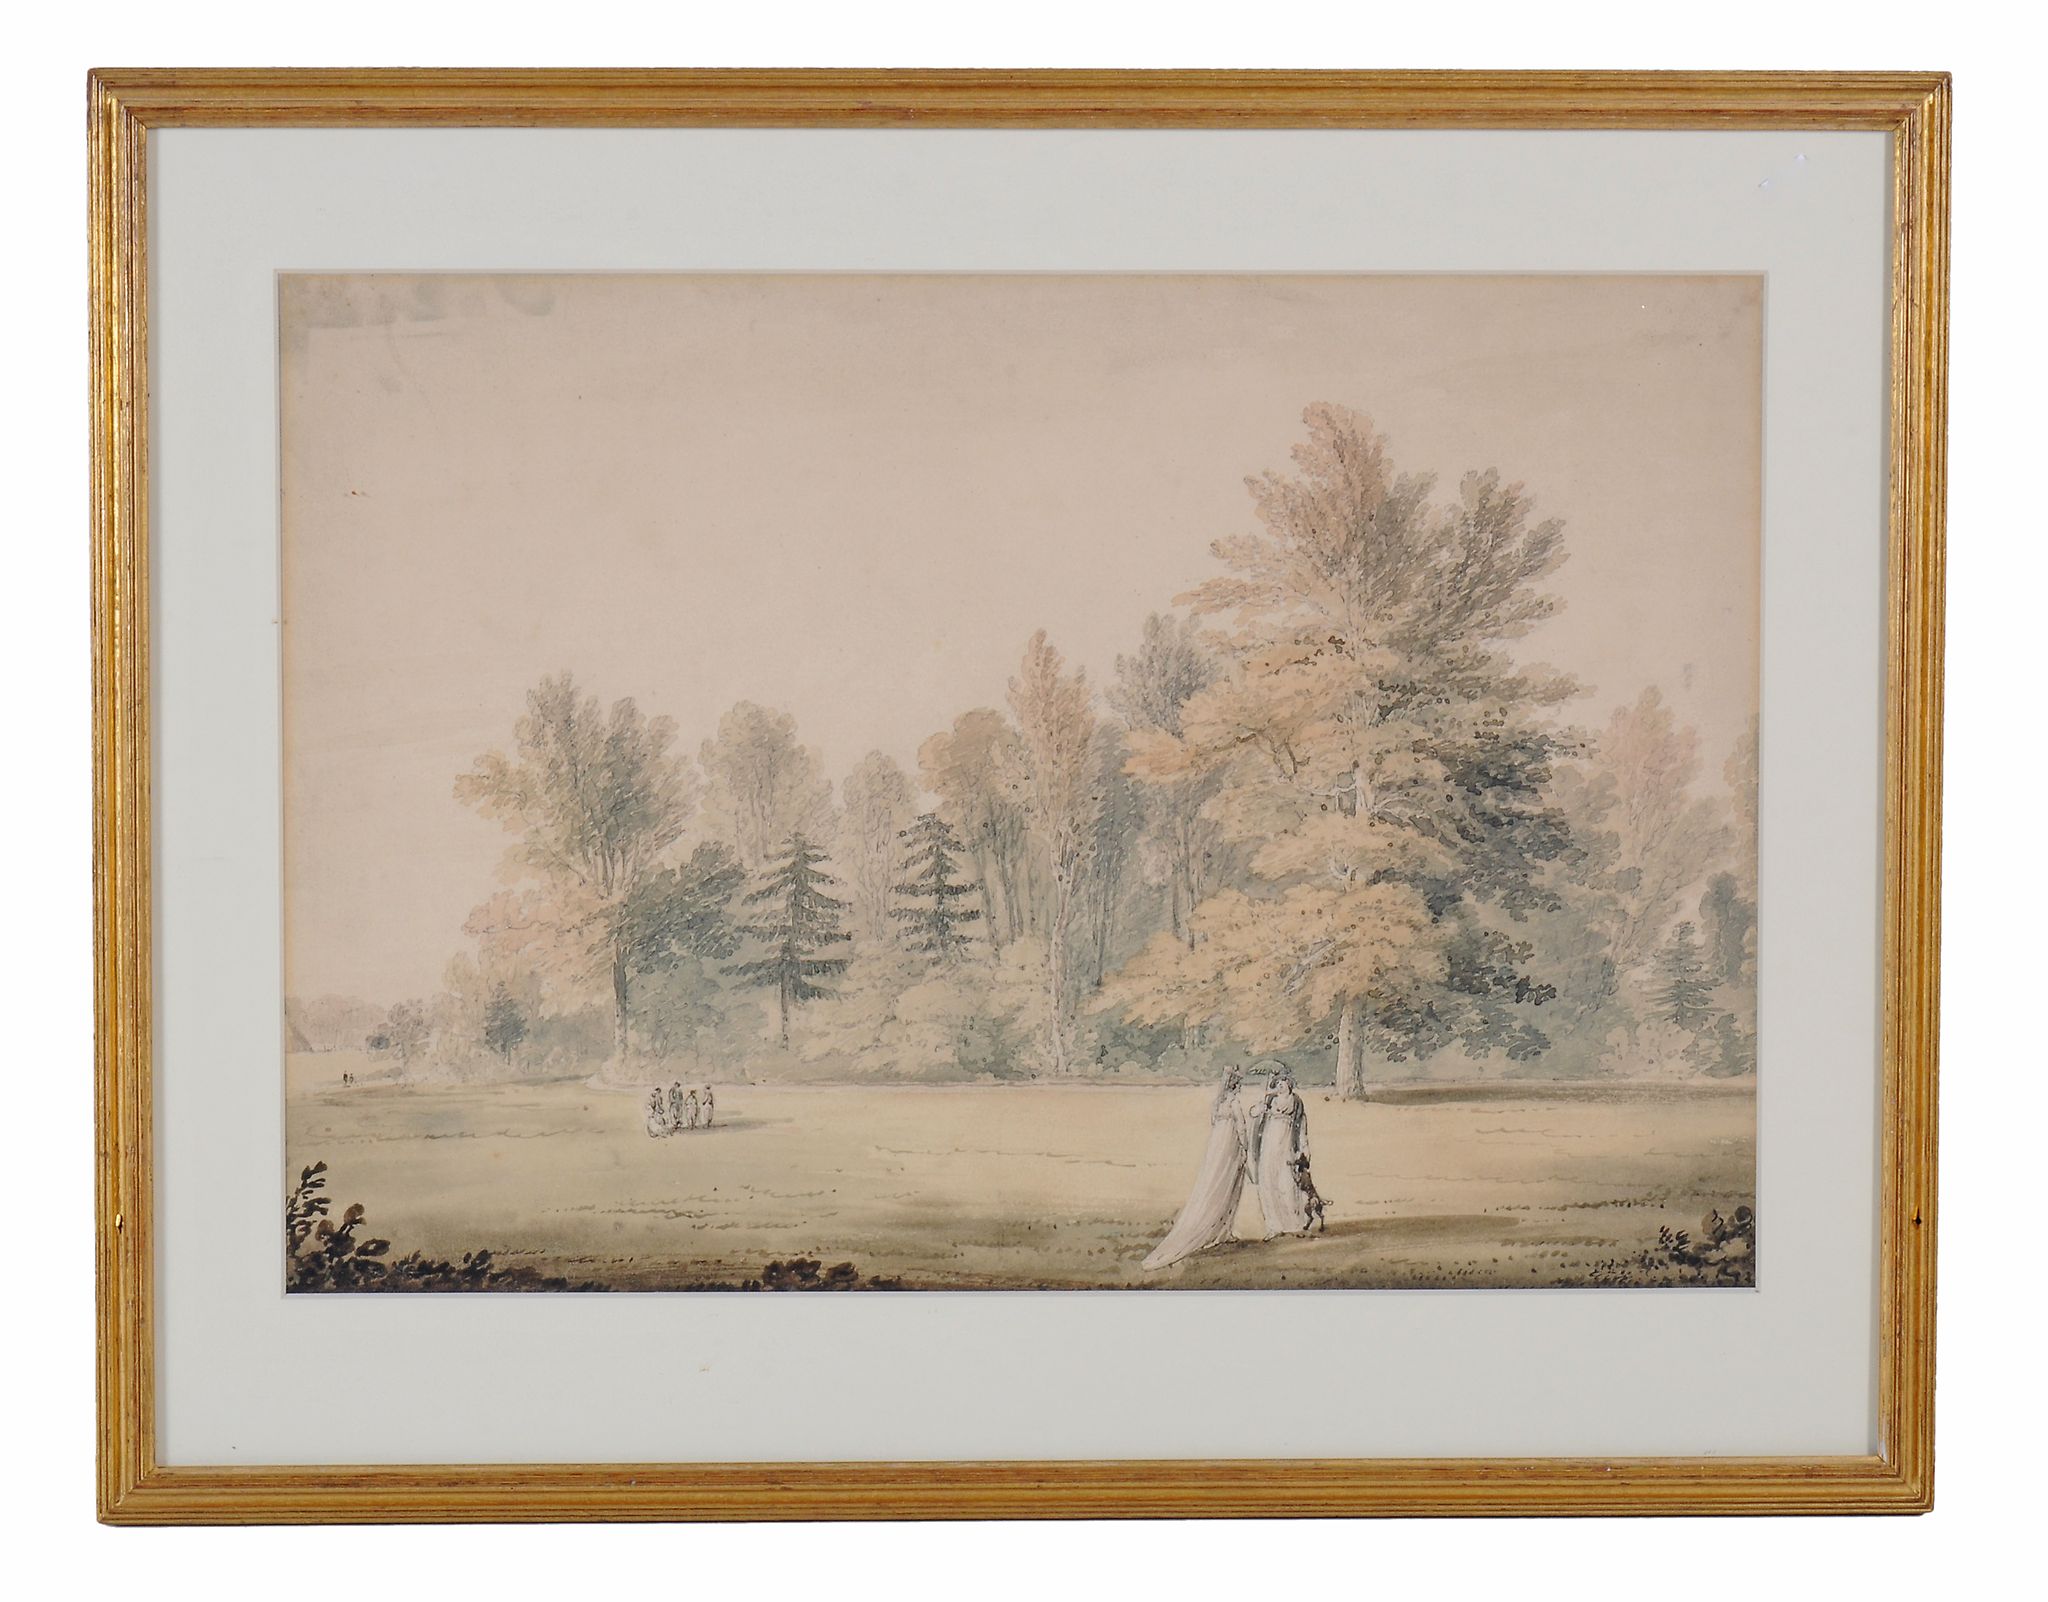 John Claude Nattes (circa 1765-1839) Figures in a park Watercolour  33 x 47 cm. (13 x 18 1/2 in) - Image 2 of 3